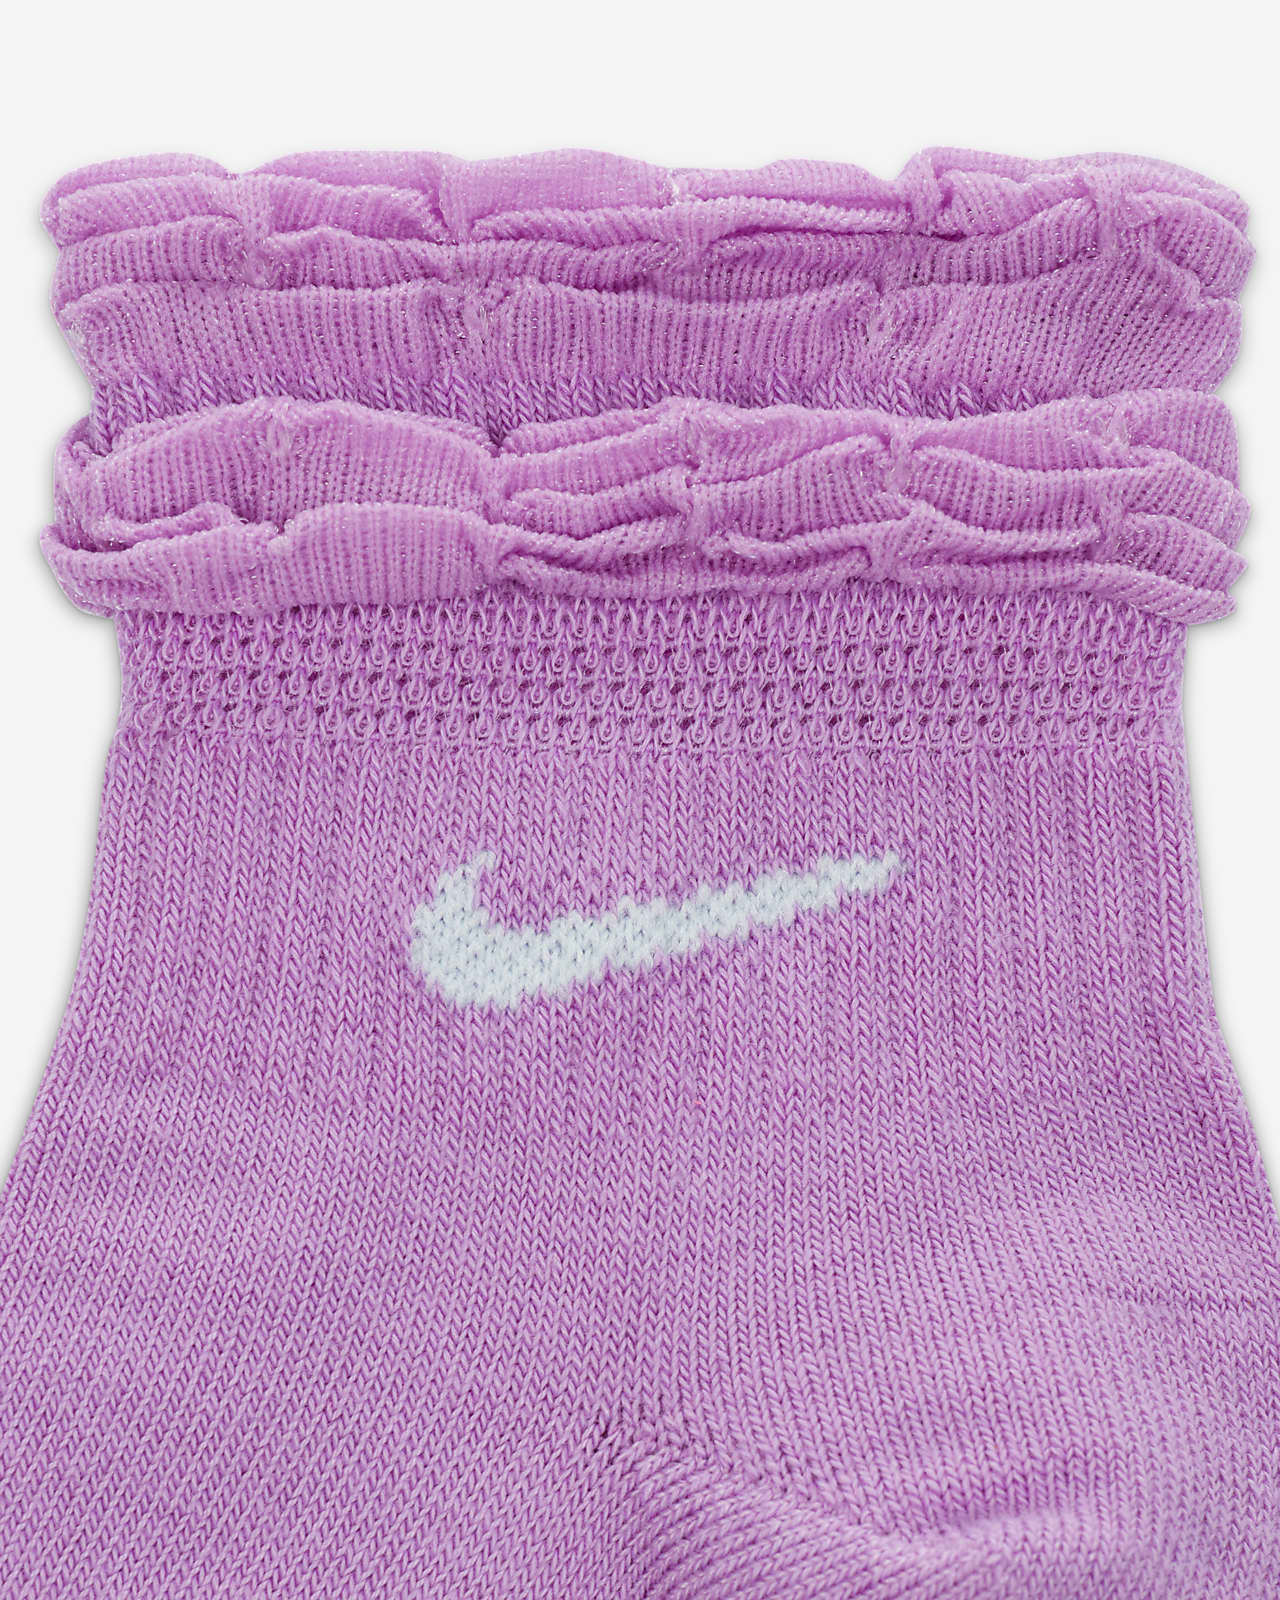 brian eybers recommends pink nike ankle socks pic